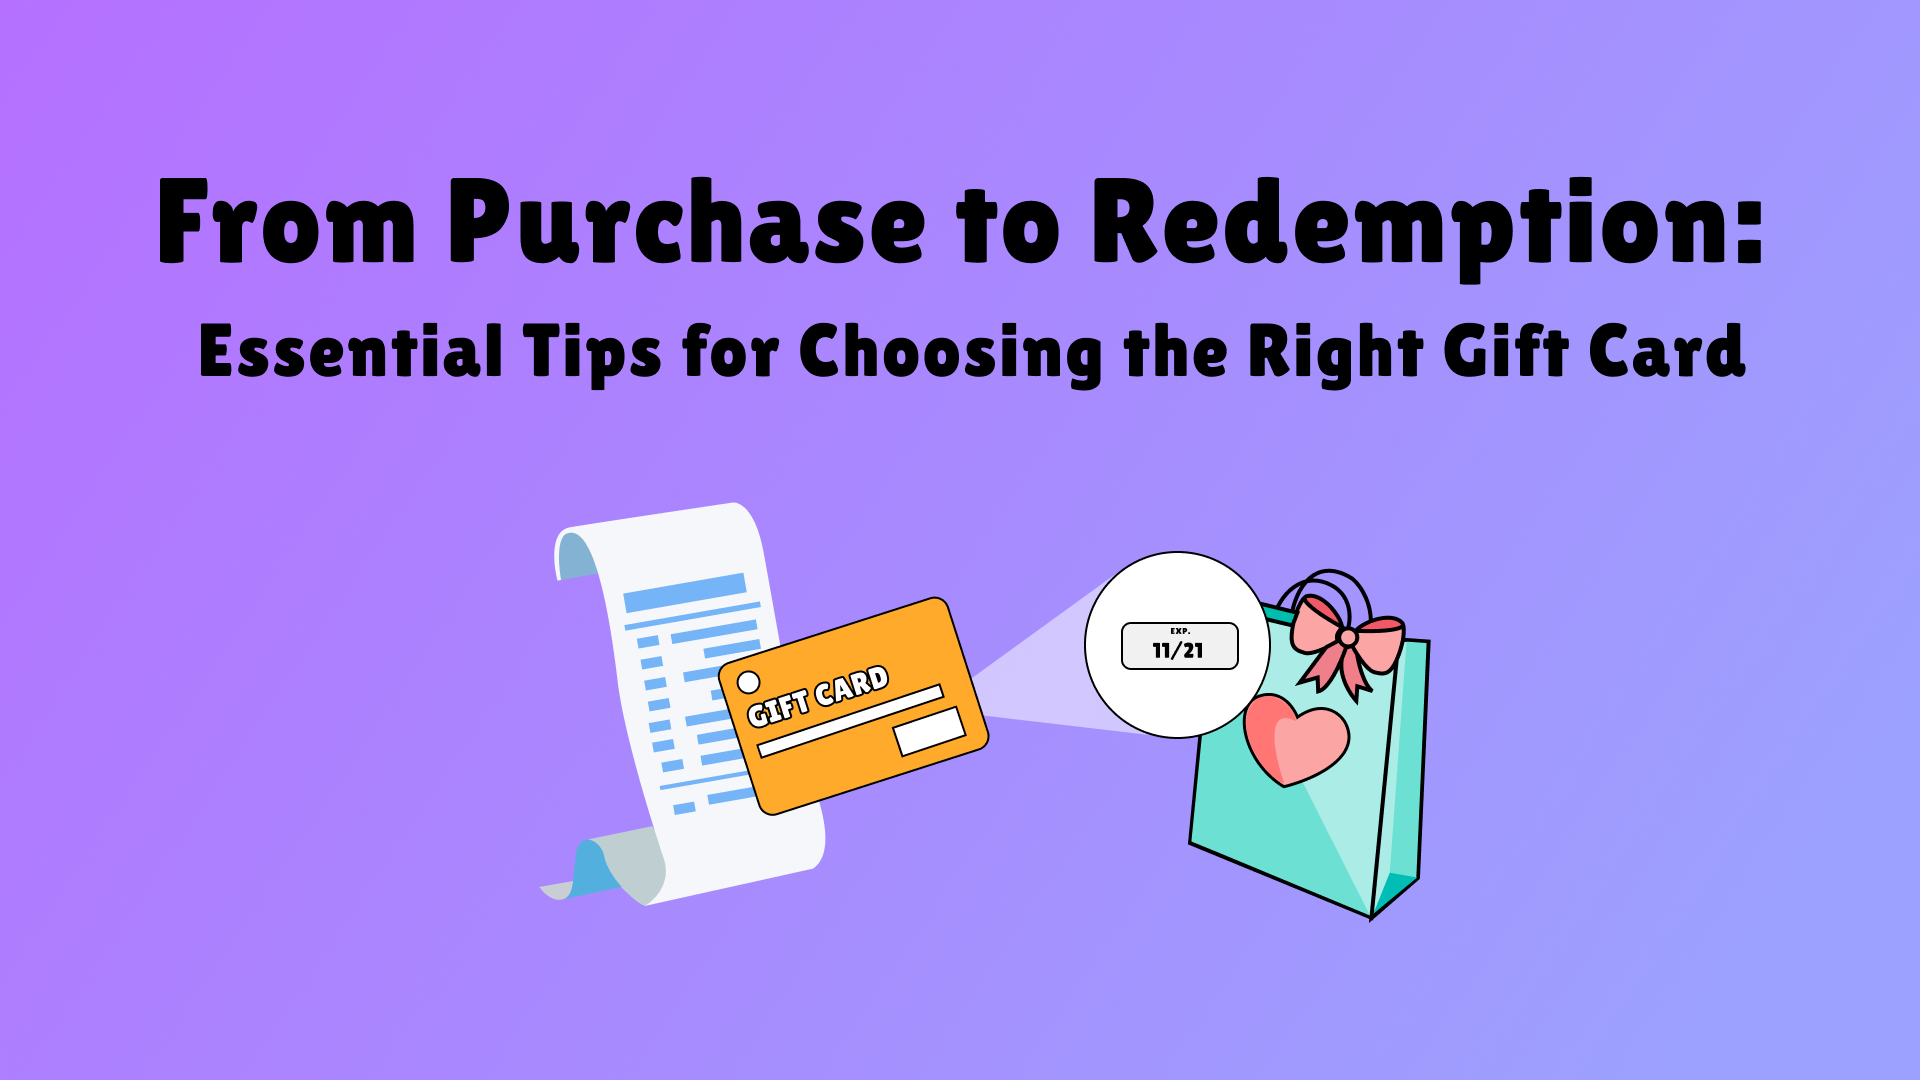 From Purchase to Redemption: Essential Tips for Choosing the Right Gift Card